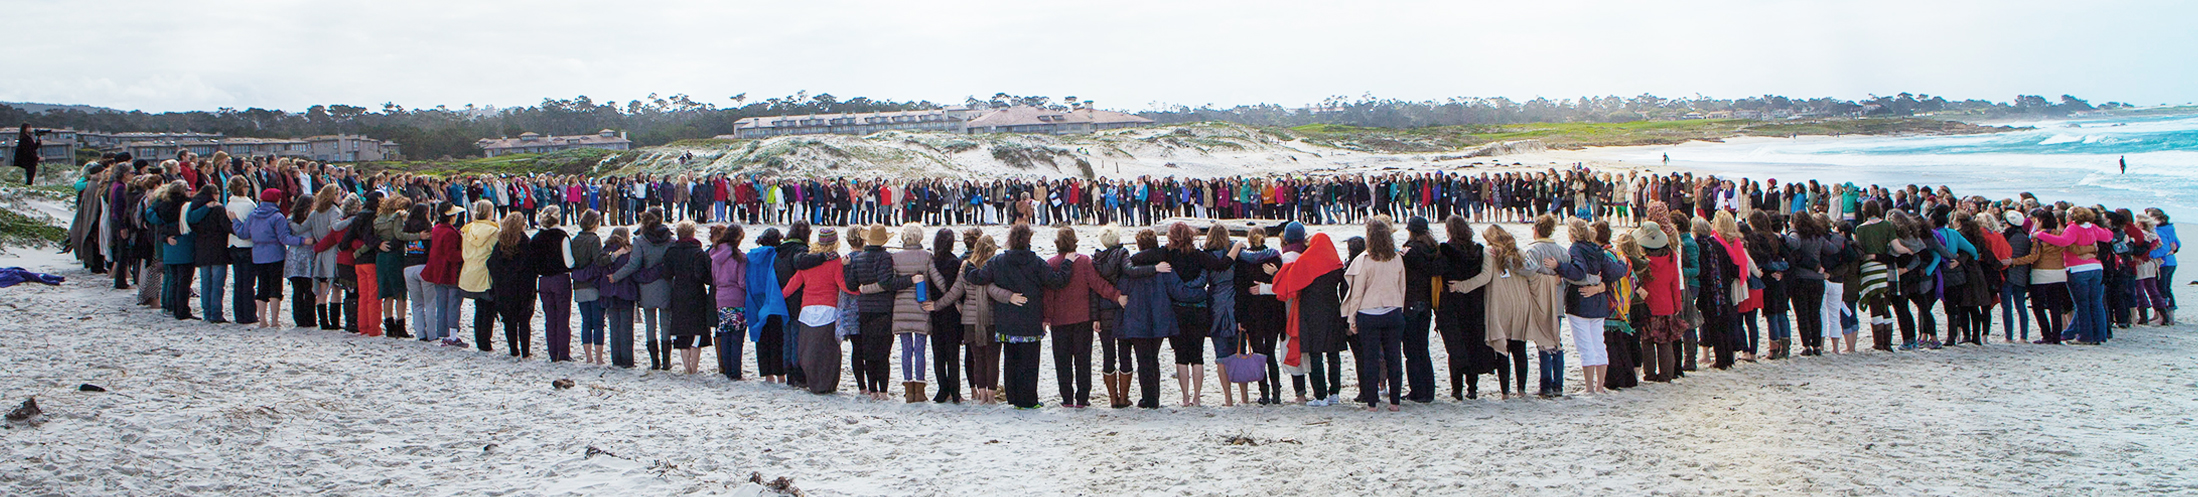 Participants holding hands in a circle on the beach